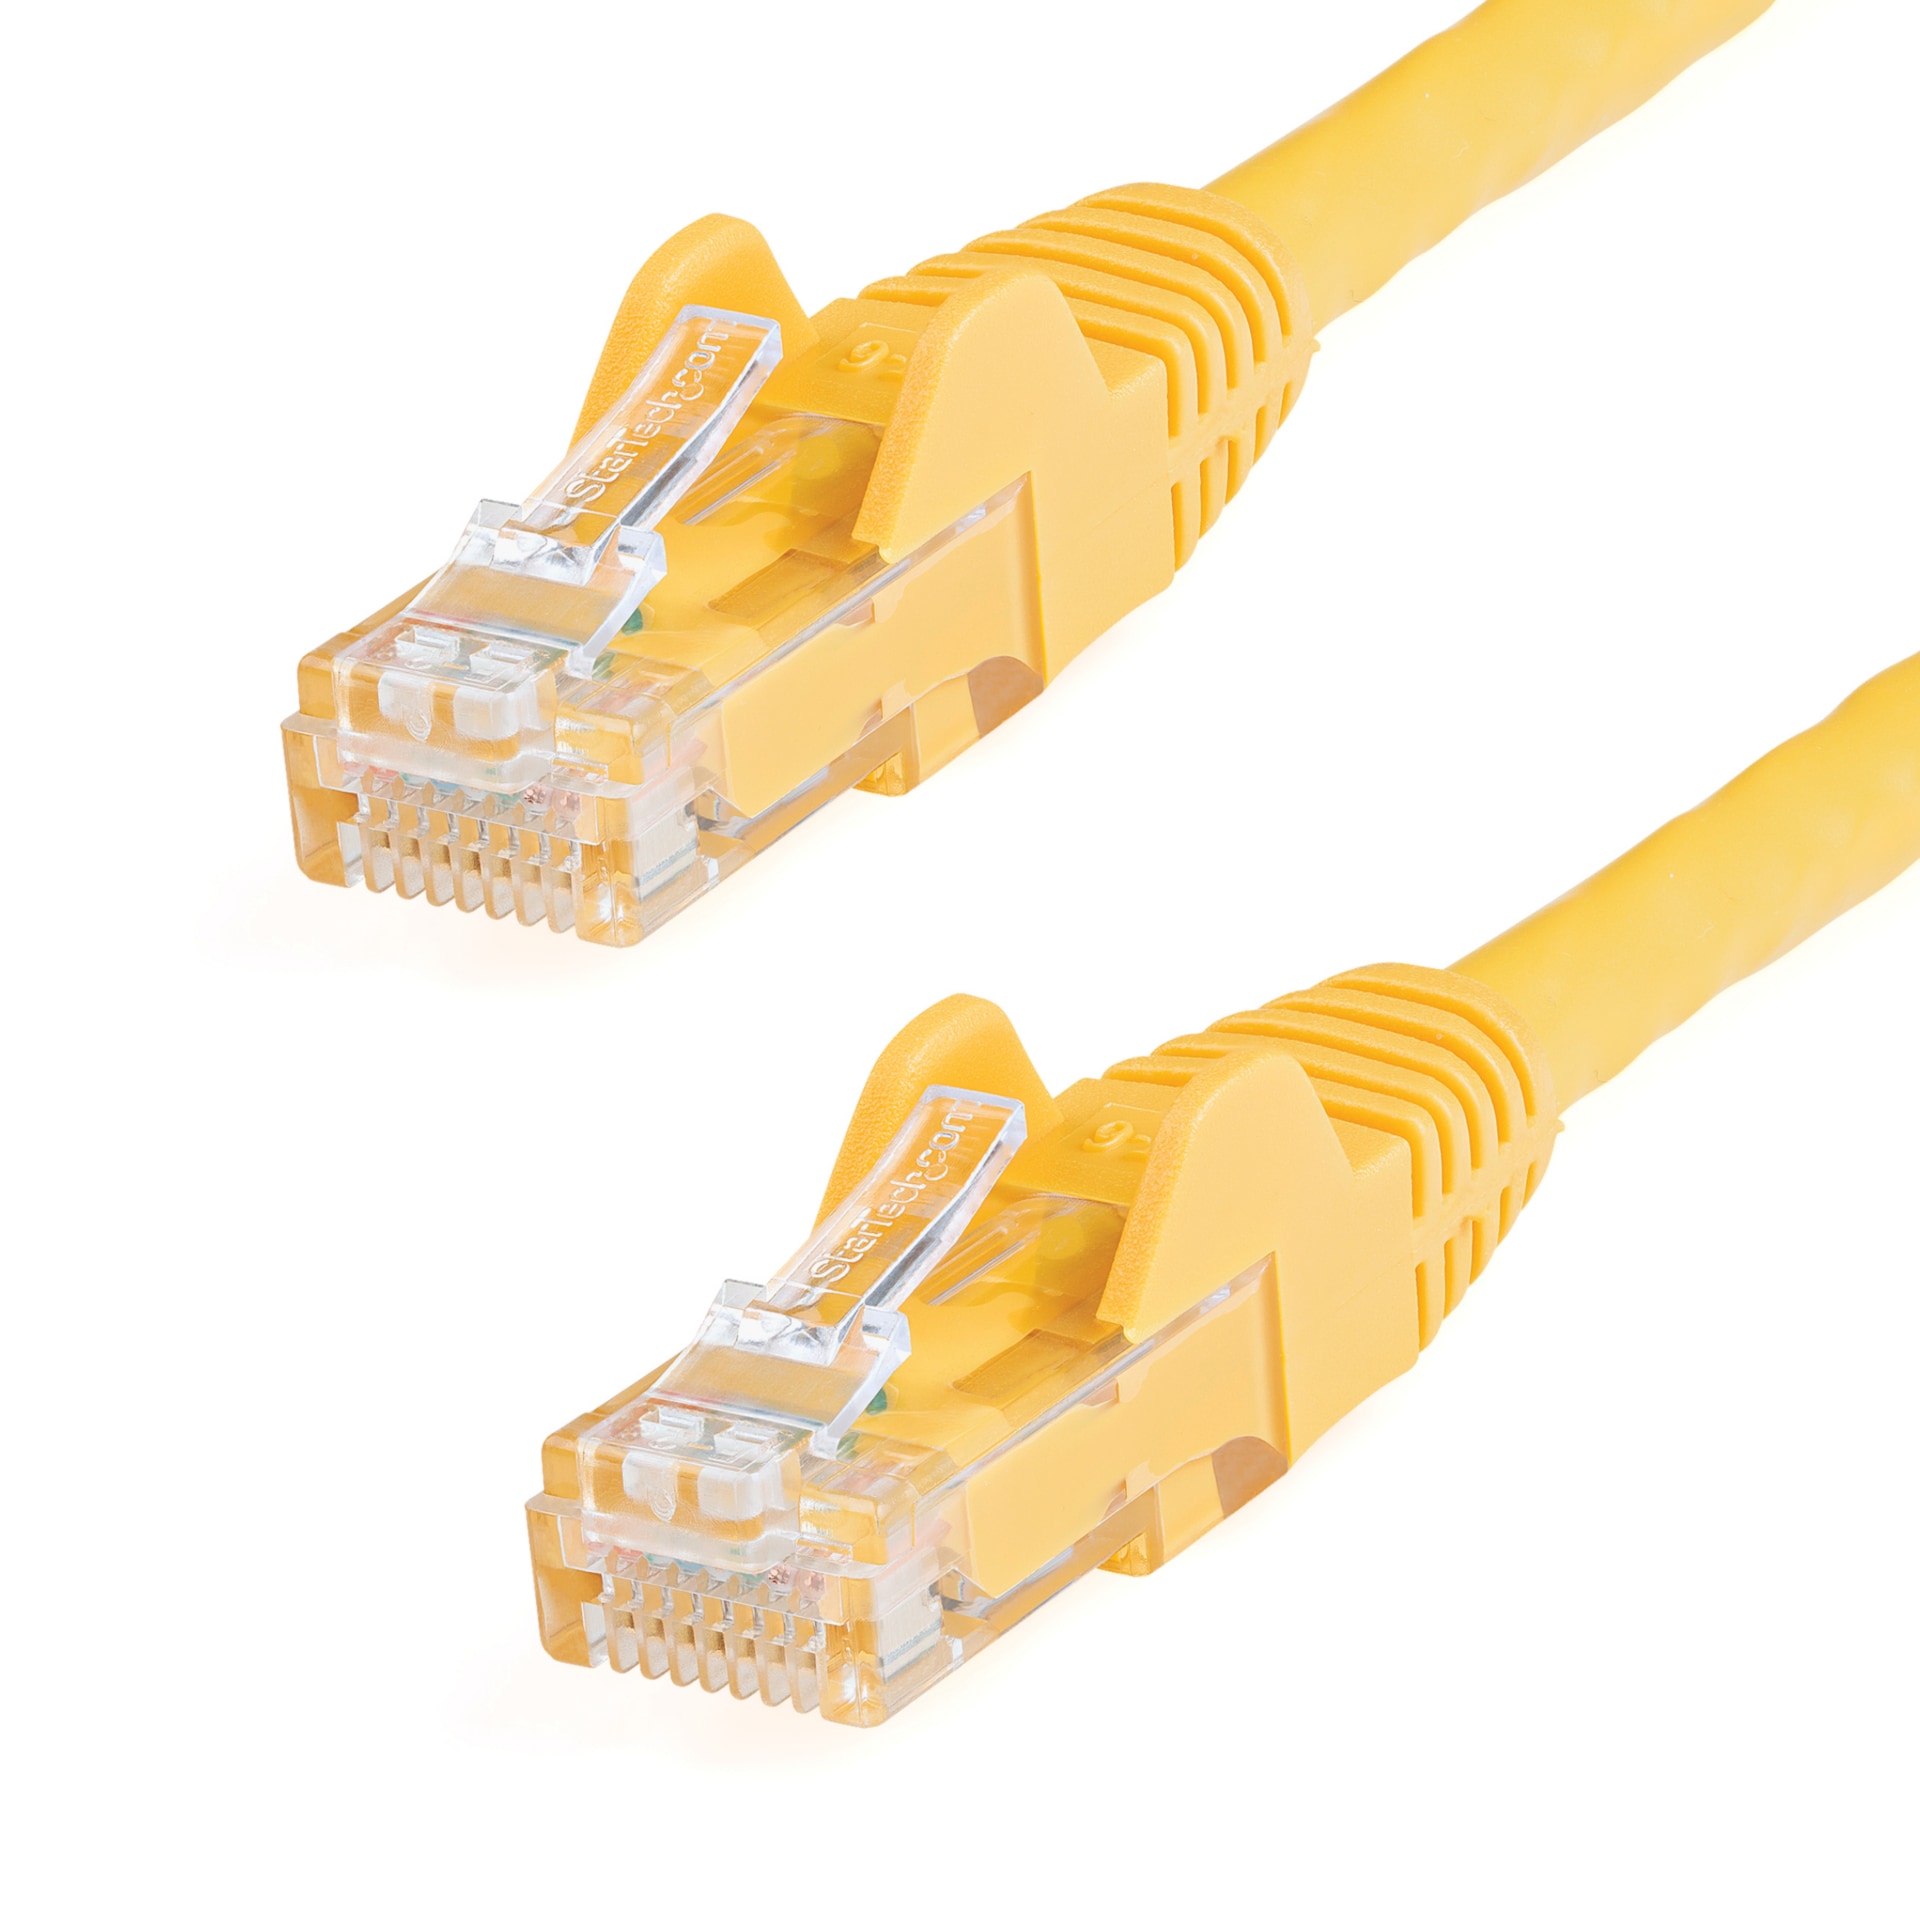 StarTech.com CAT6 Ethernet Cable 6' Yellow 650MHz PoE Snagless Patch Cord